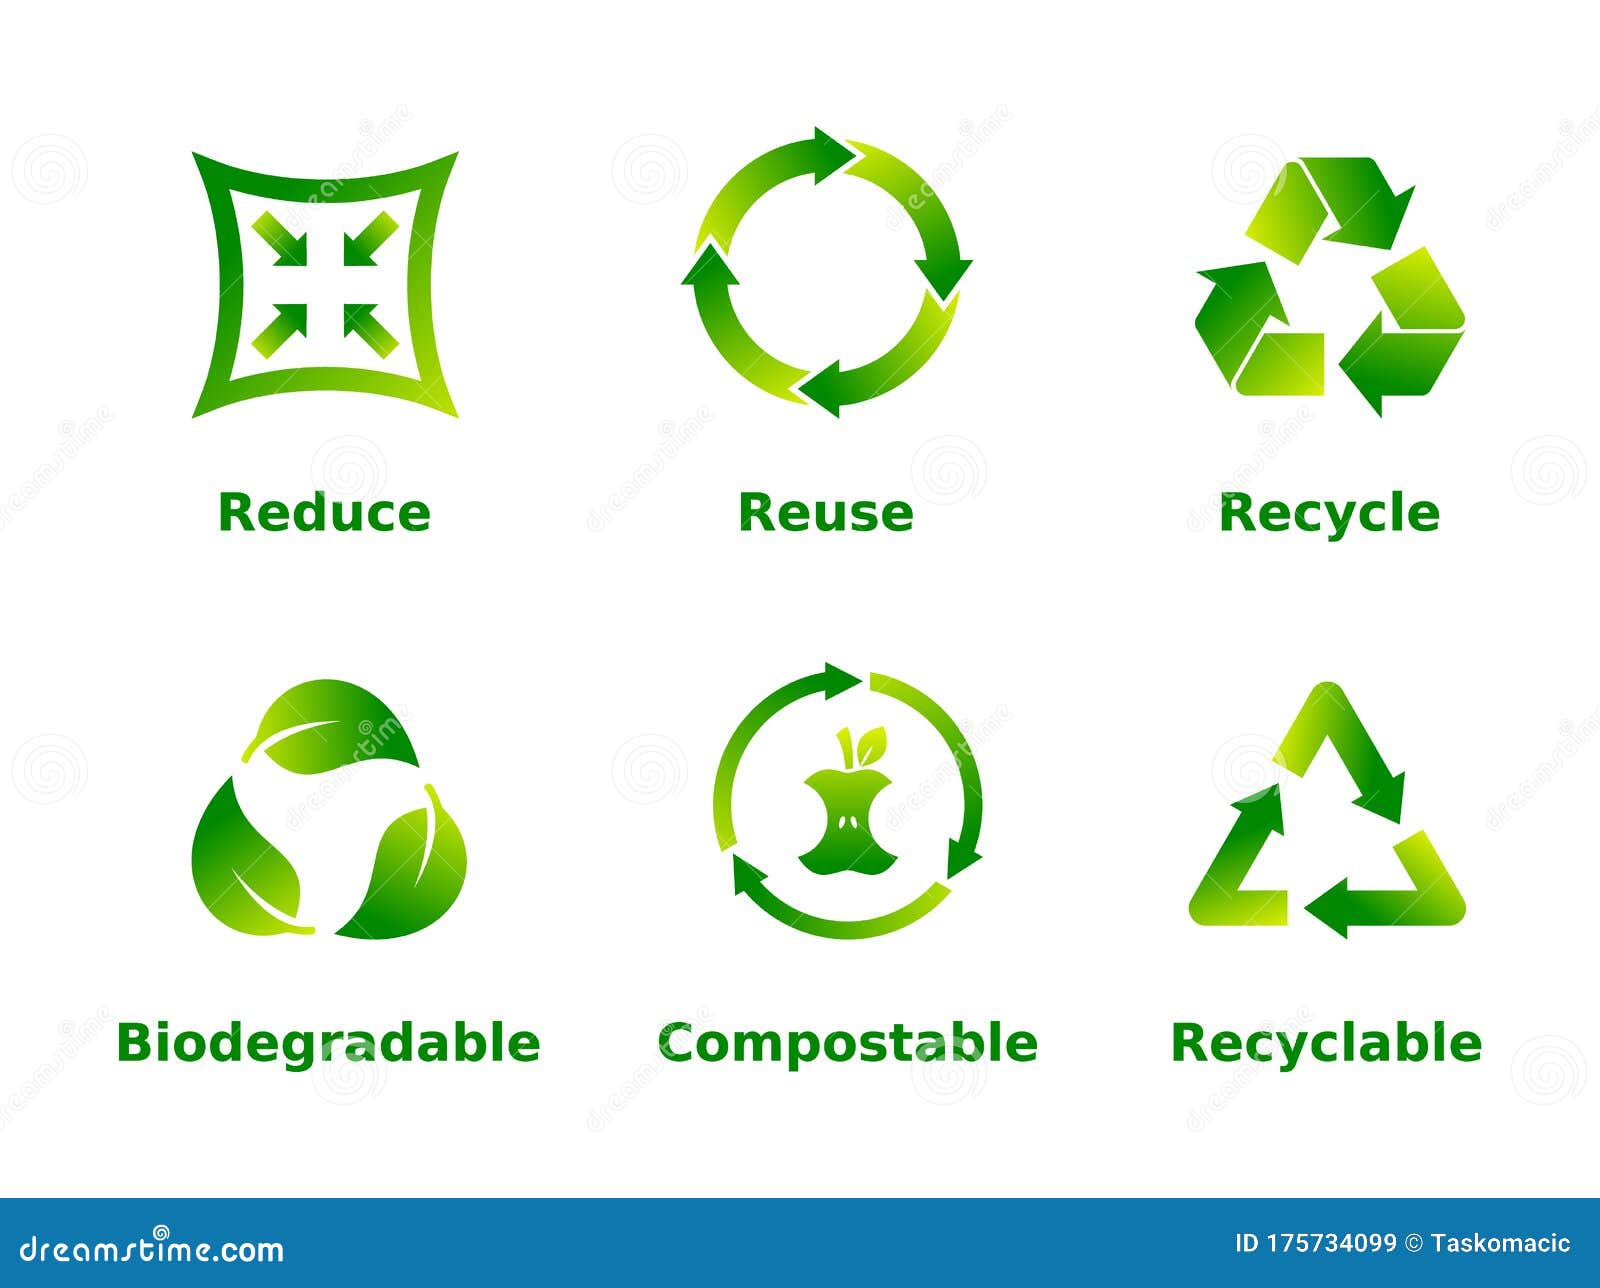 reduce, reuse, recycle, biodegradable, compostable, recyclable, icon set. six recycle green gradient signs on white background.